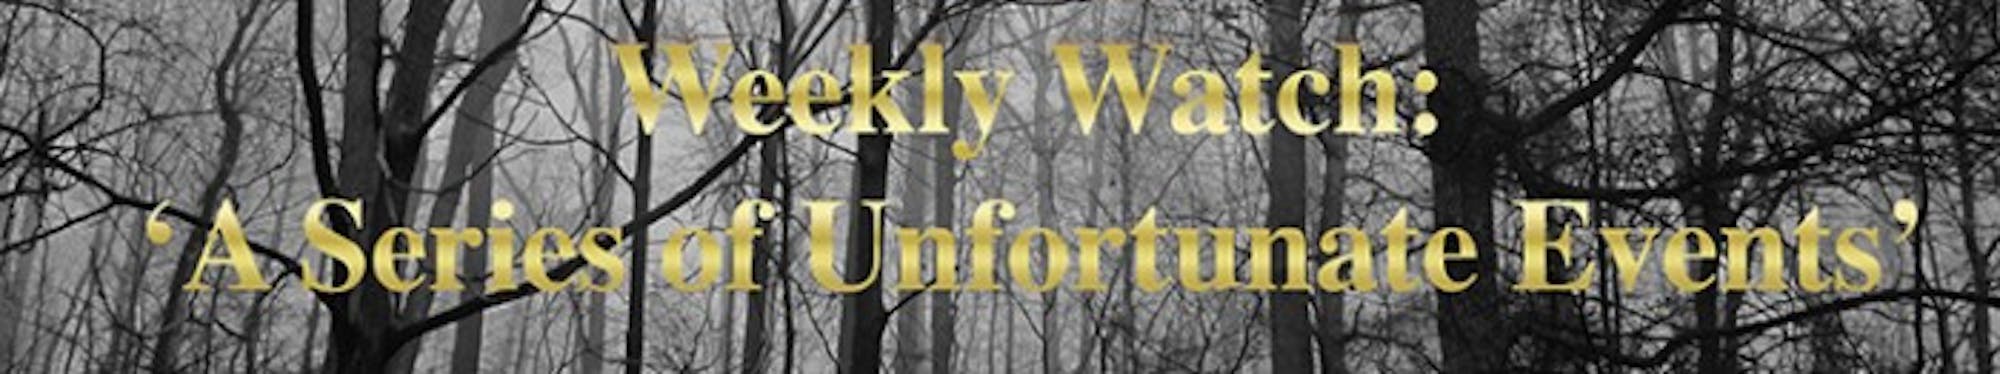 Weekly Watch Banner for WEB (1)